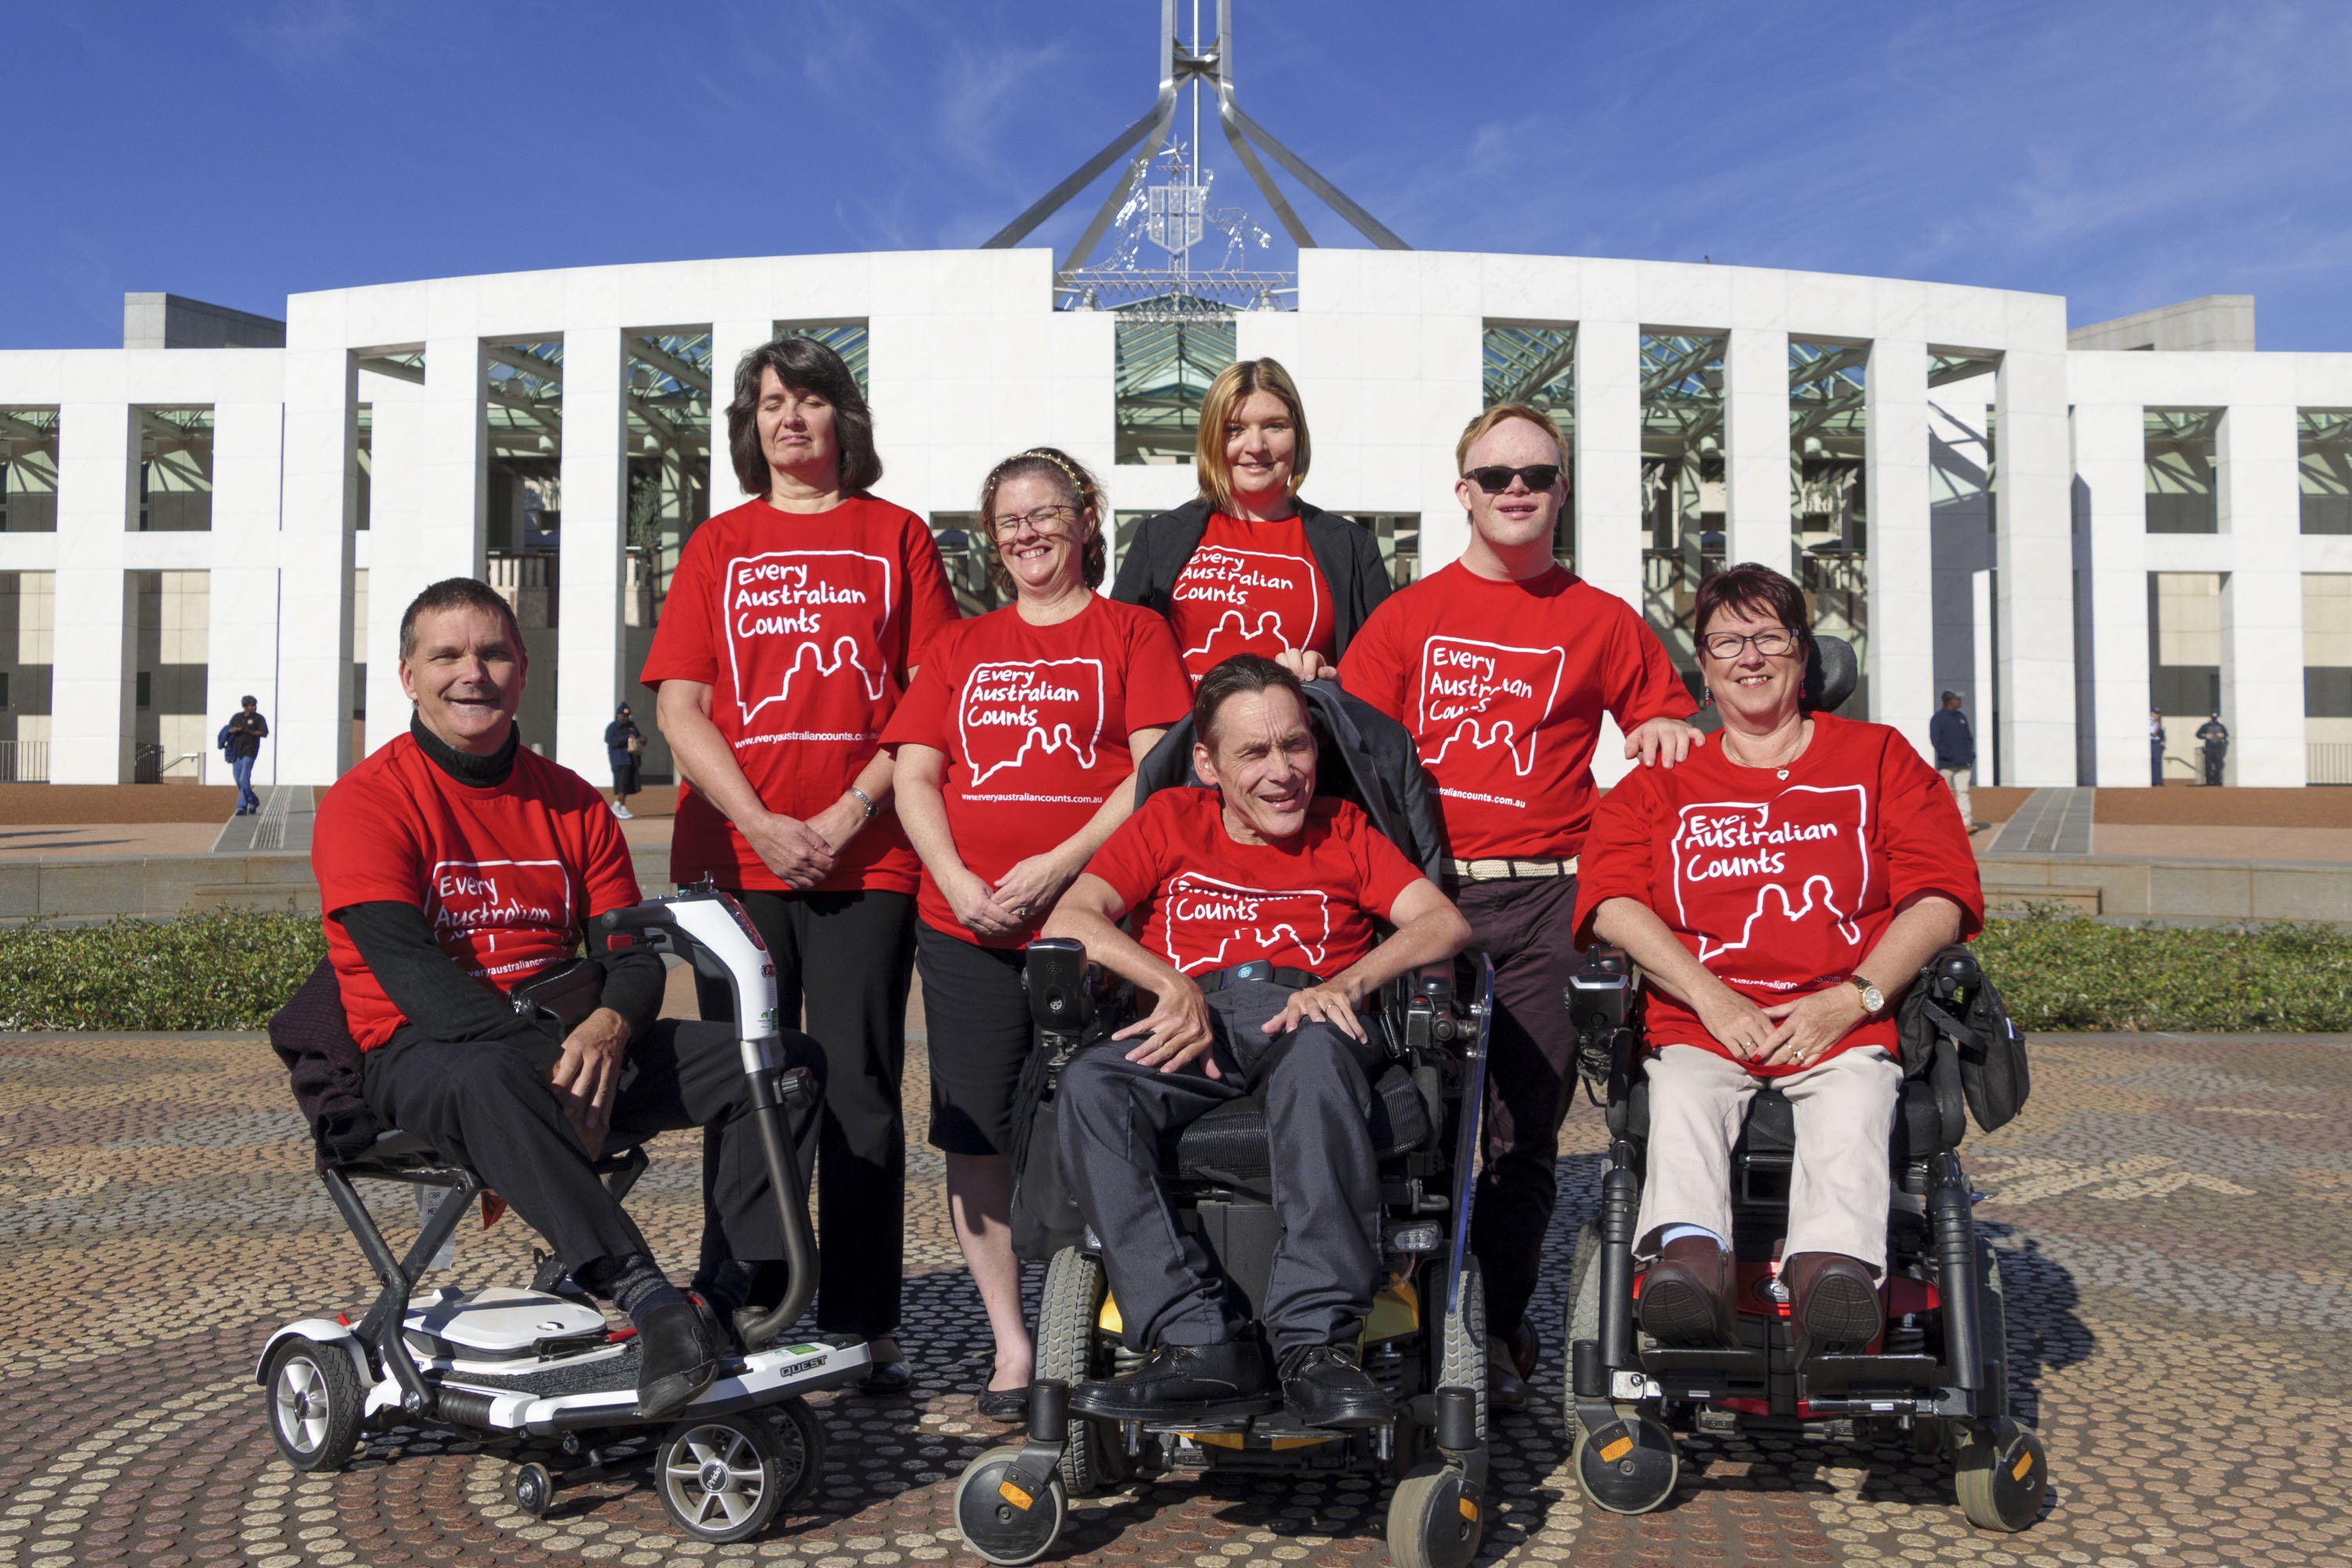 Every Australian Counts Champions stand together in their red t-shirts at Parliament House in Canberra